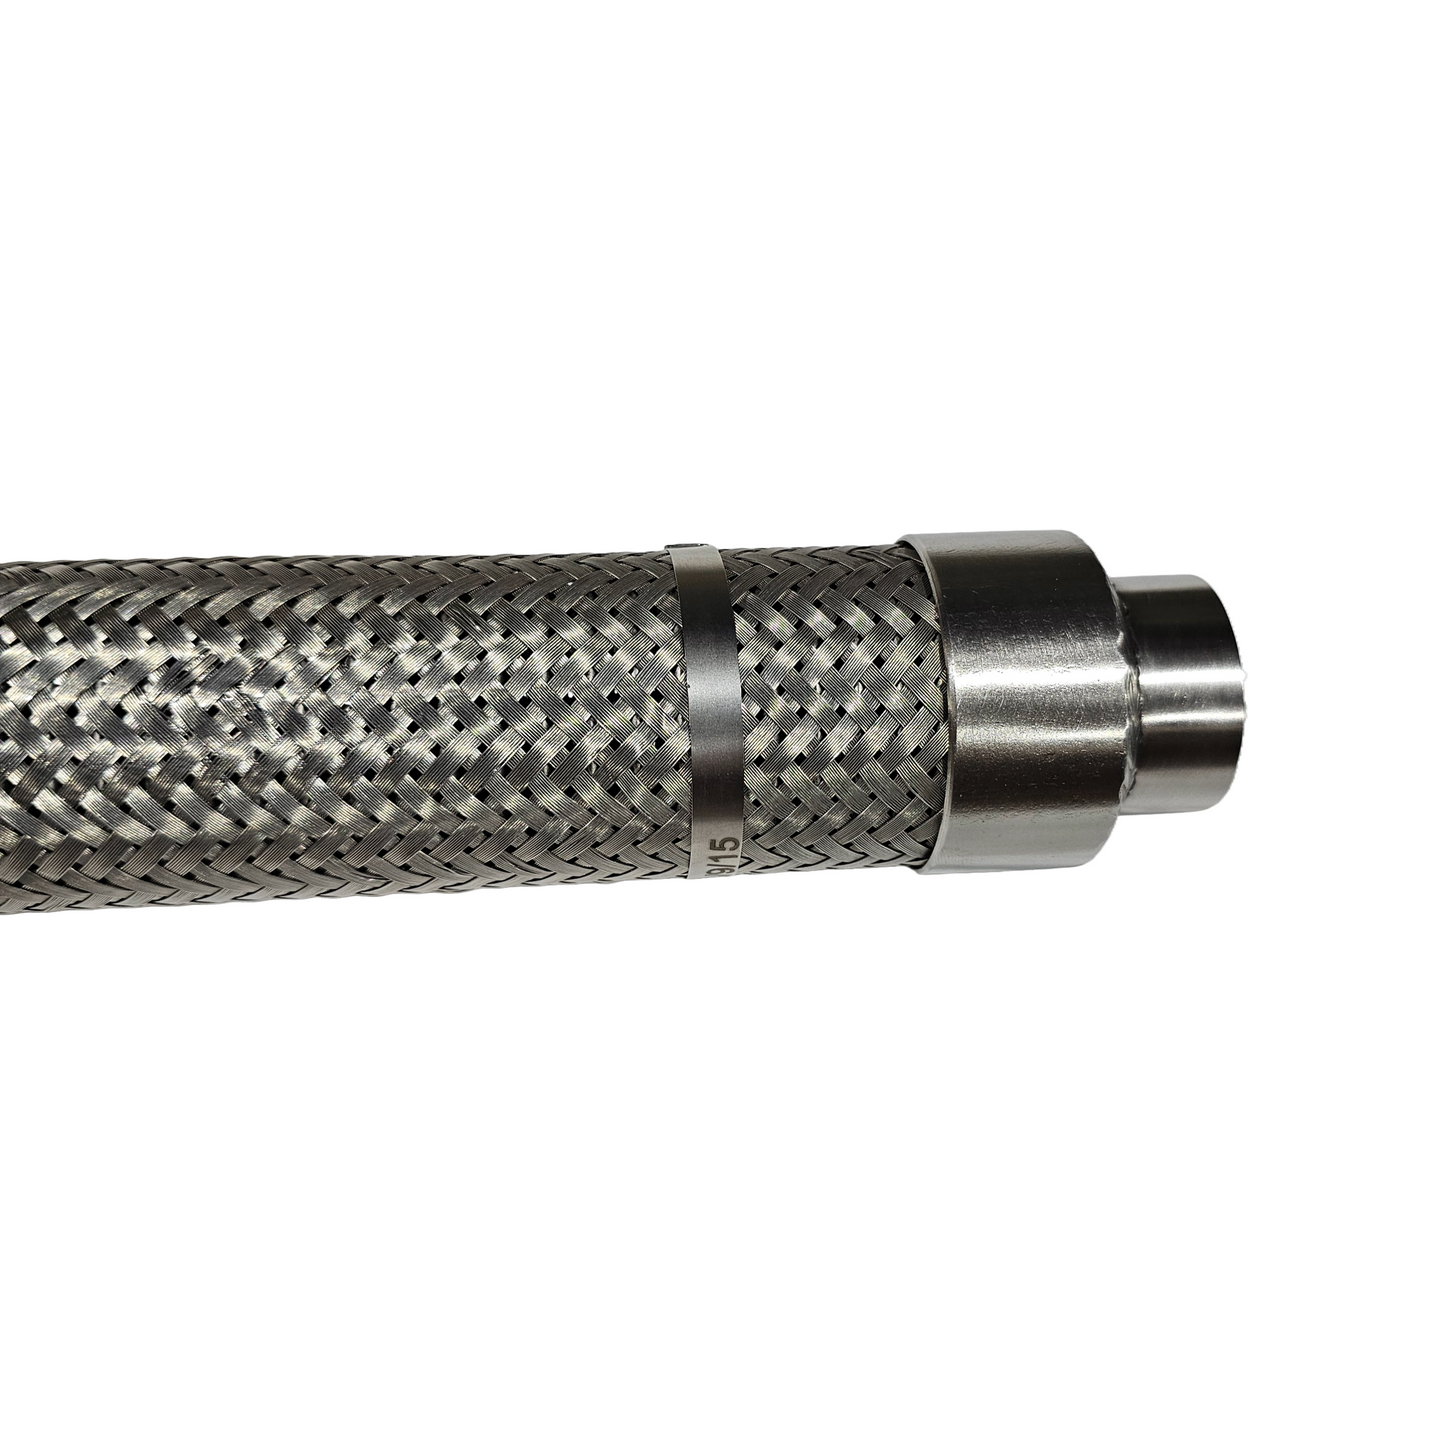 2" Braided Stainless Steel Hose